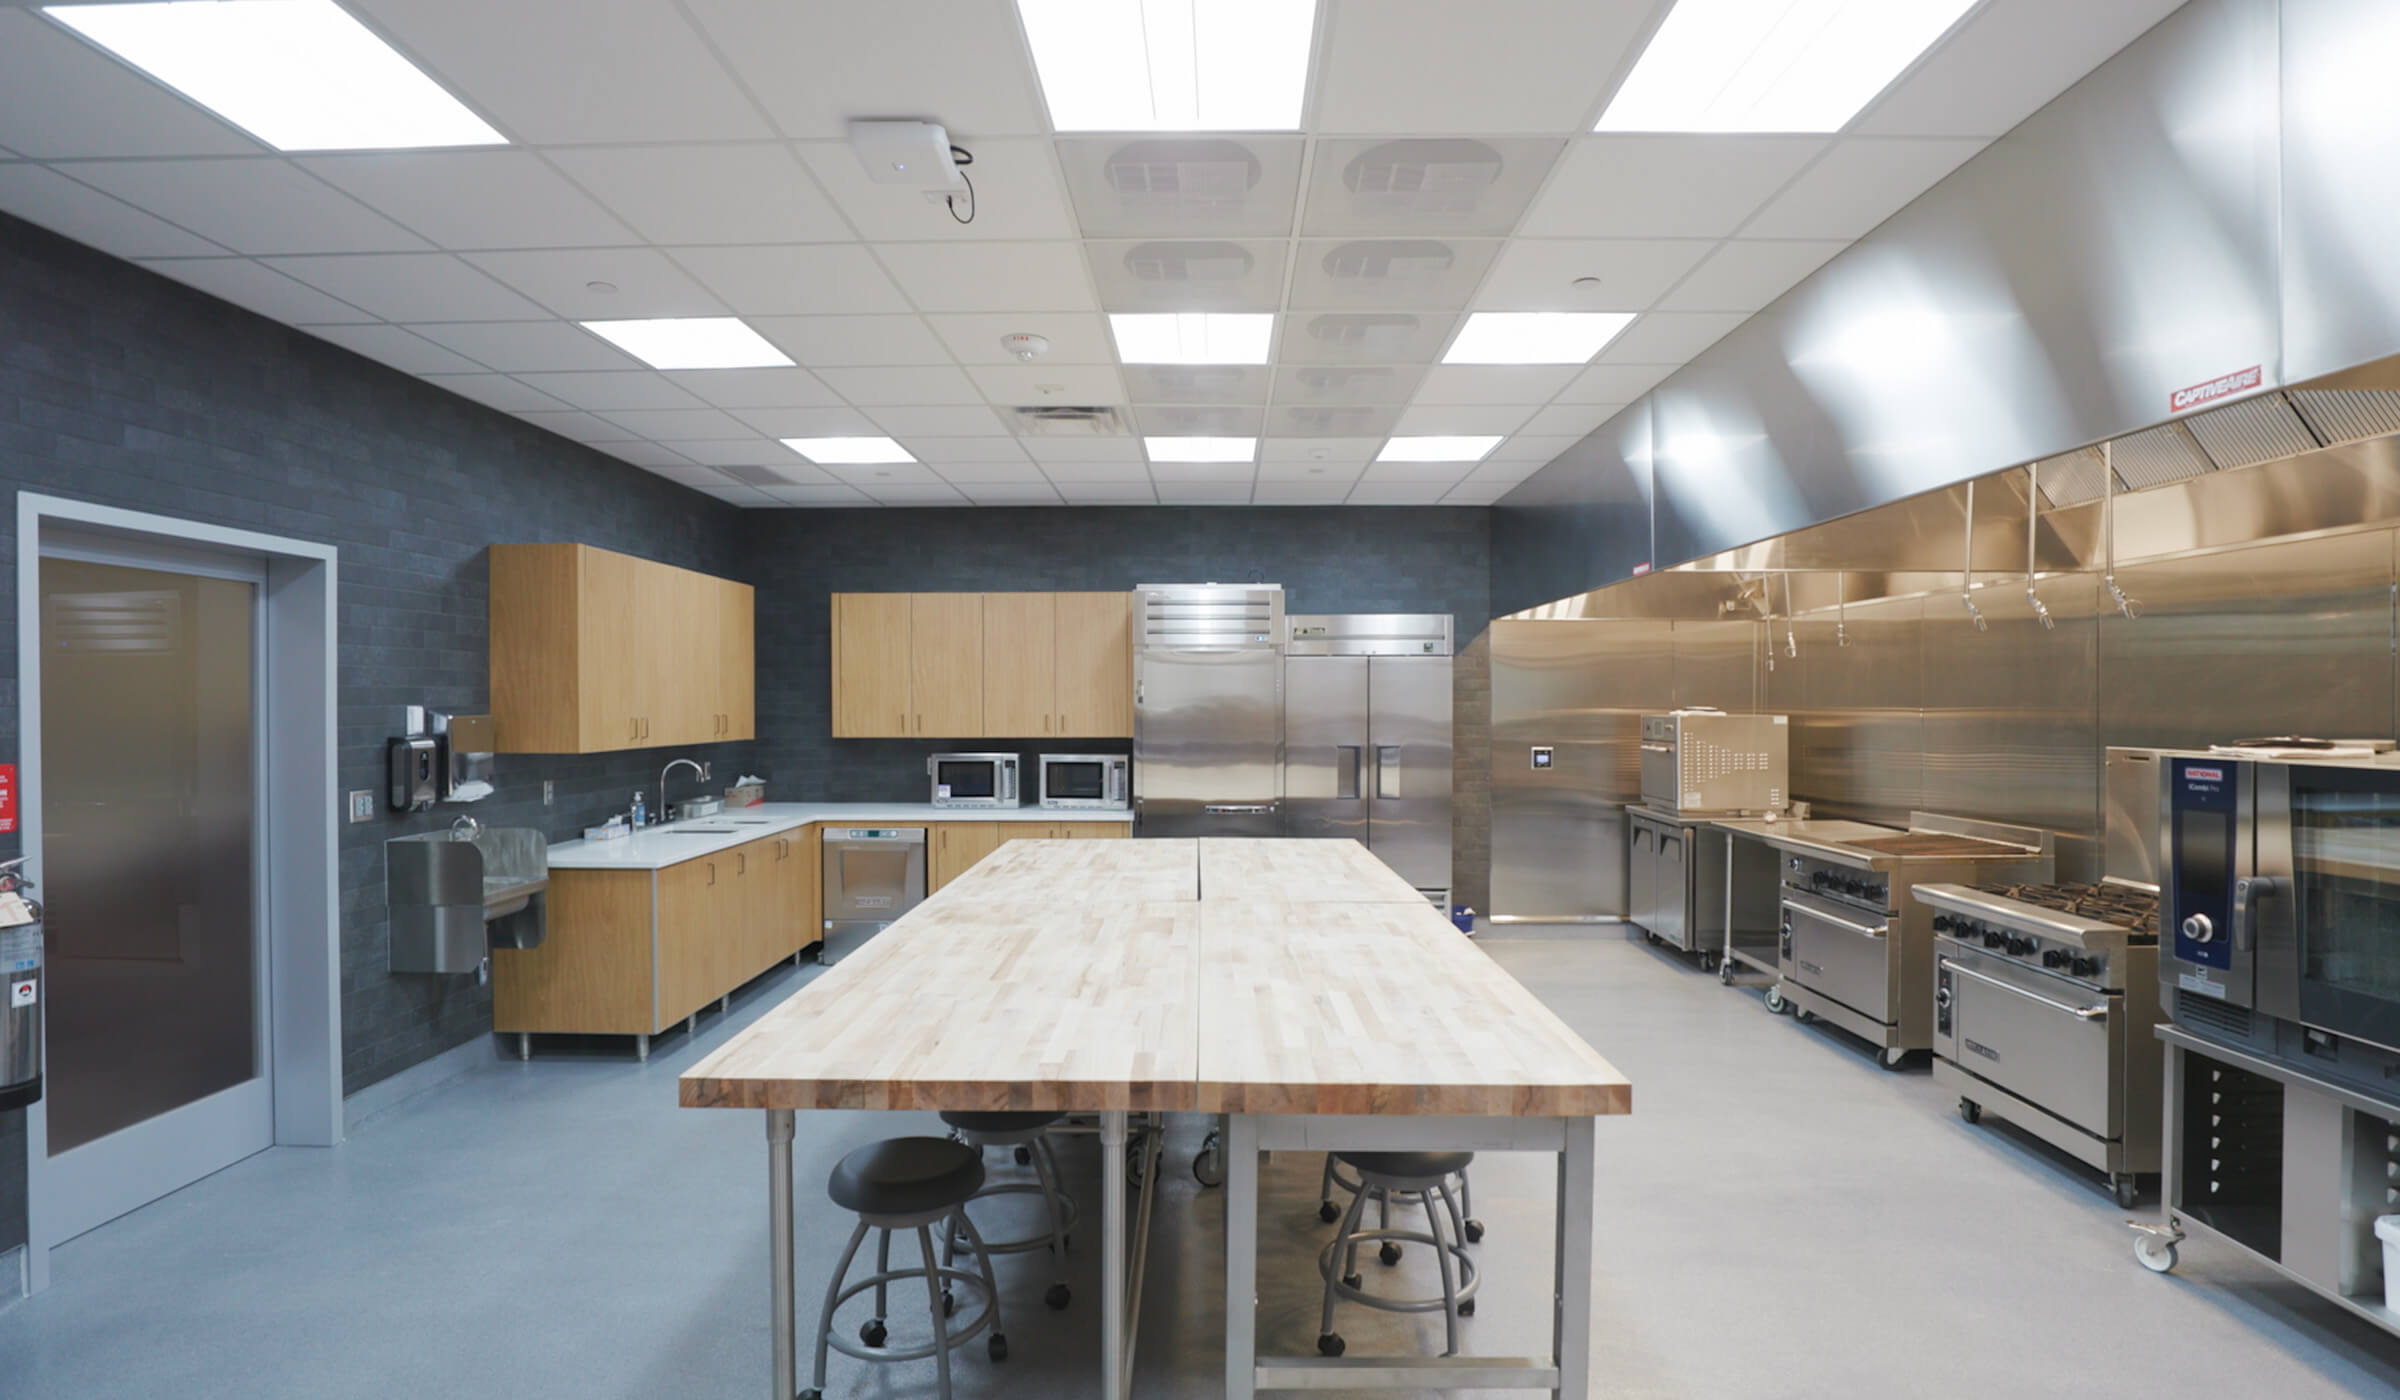 One of the new kitchens in the Austin innovation center